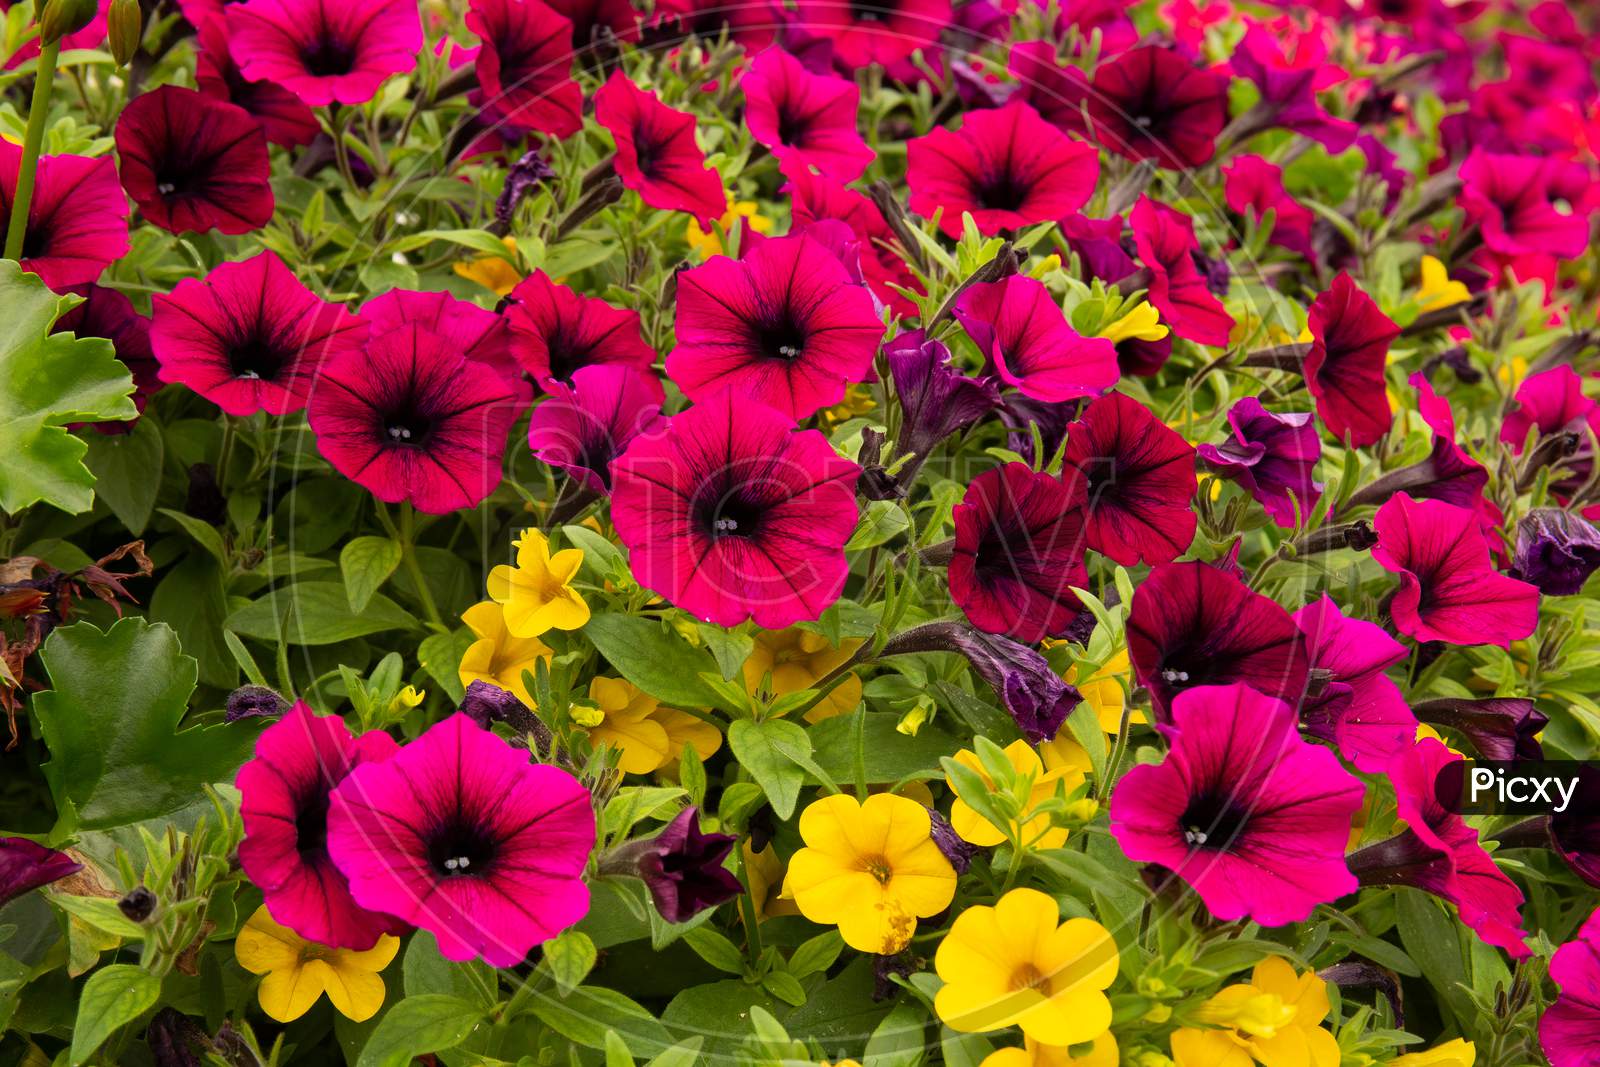 Colorful close-up of Petunias in flower bed.